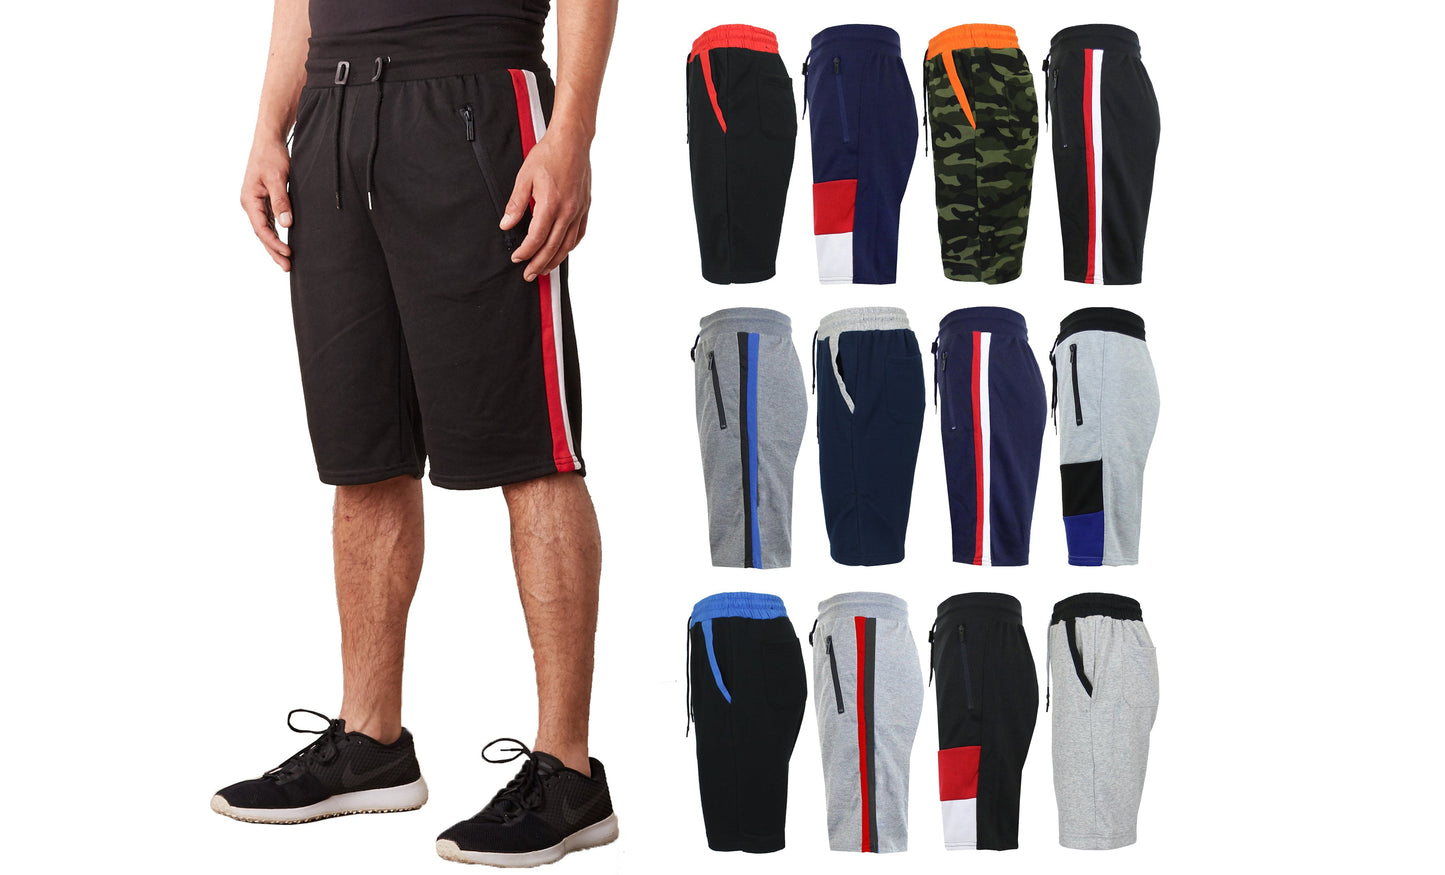 3-PACK Men's French Terry Sweat Shorts Casual Summer Set - GalaxybyHarvic